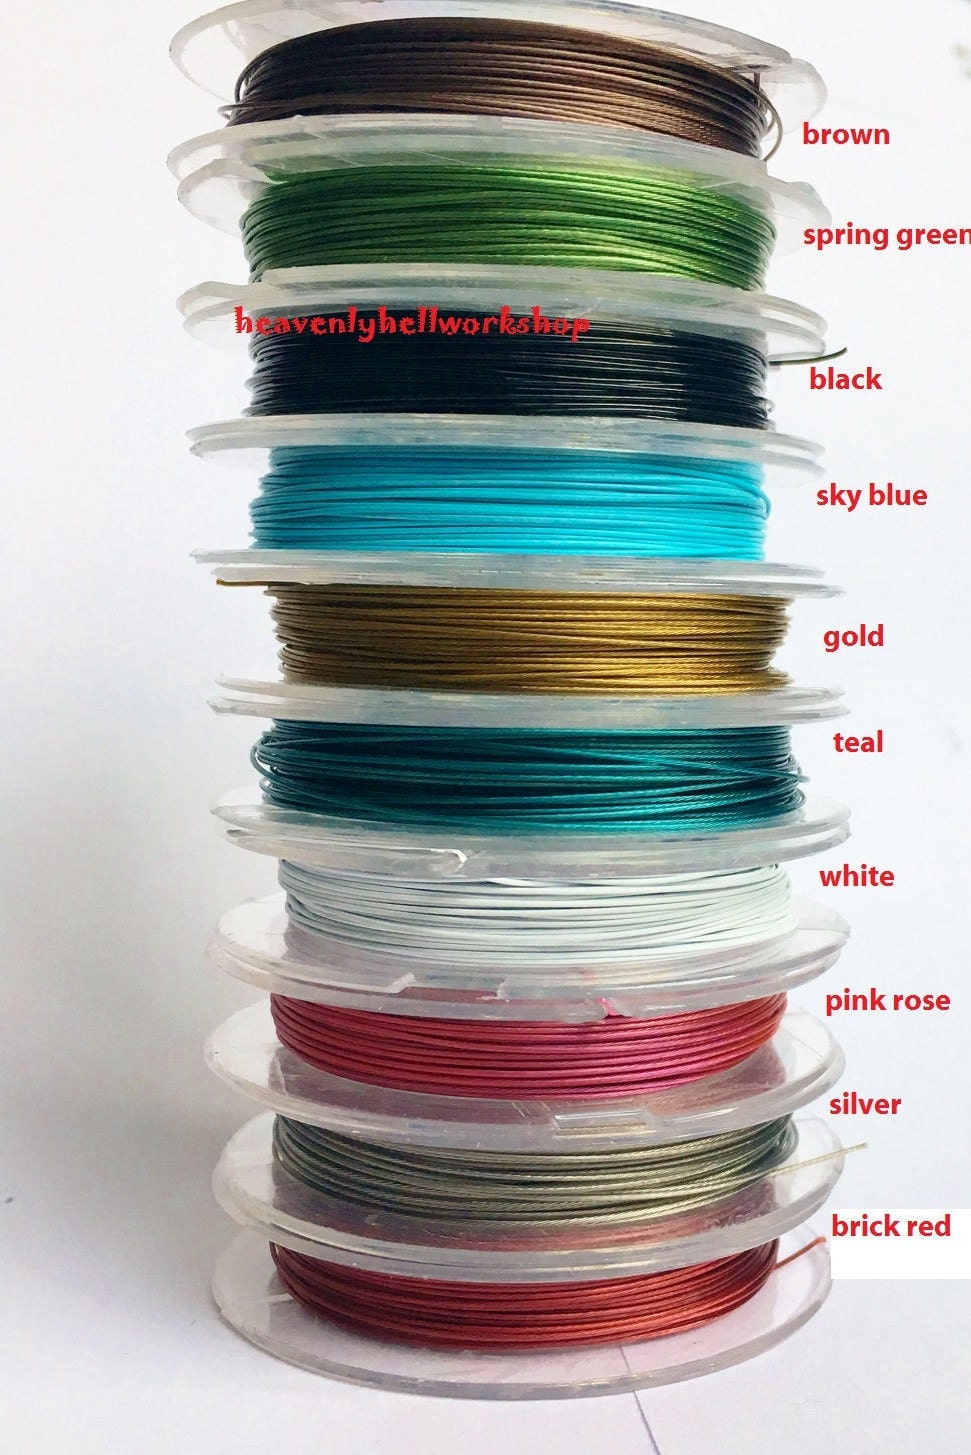 18 Gauge Wire, 1mm Thick Bright Blue Aluminum Craft Wire, 10m Roll